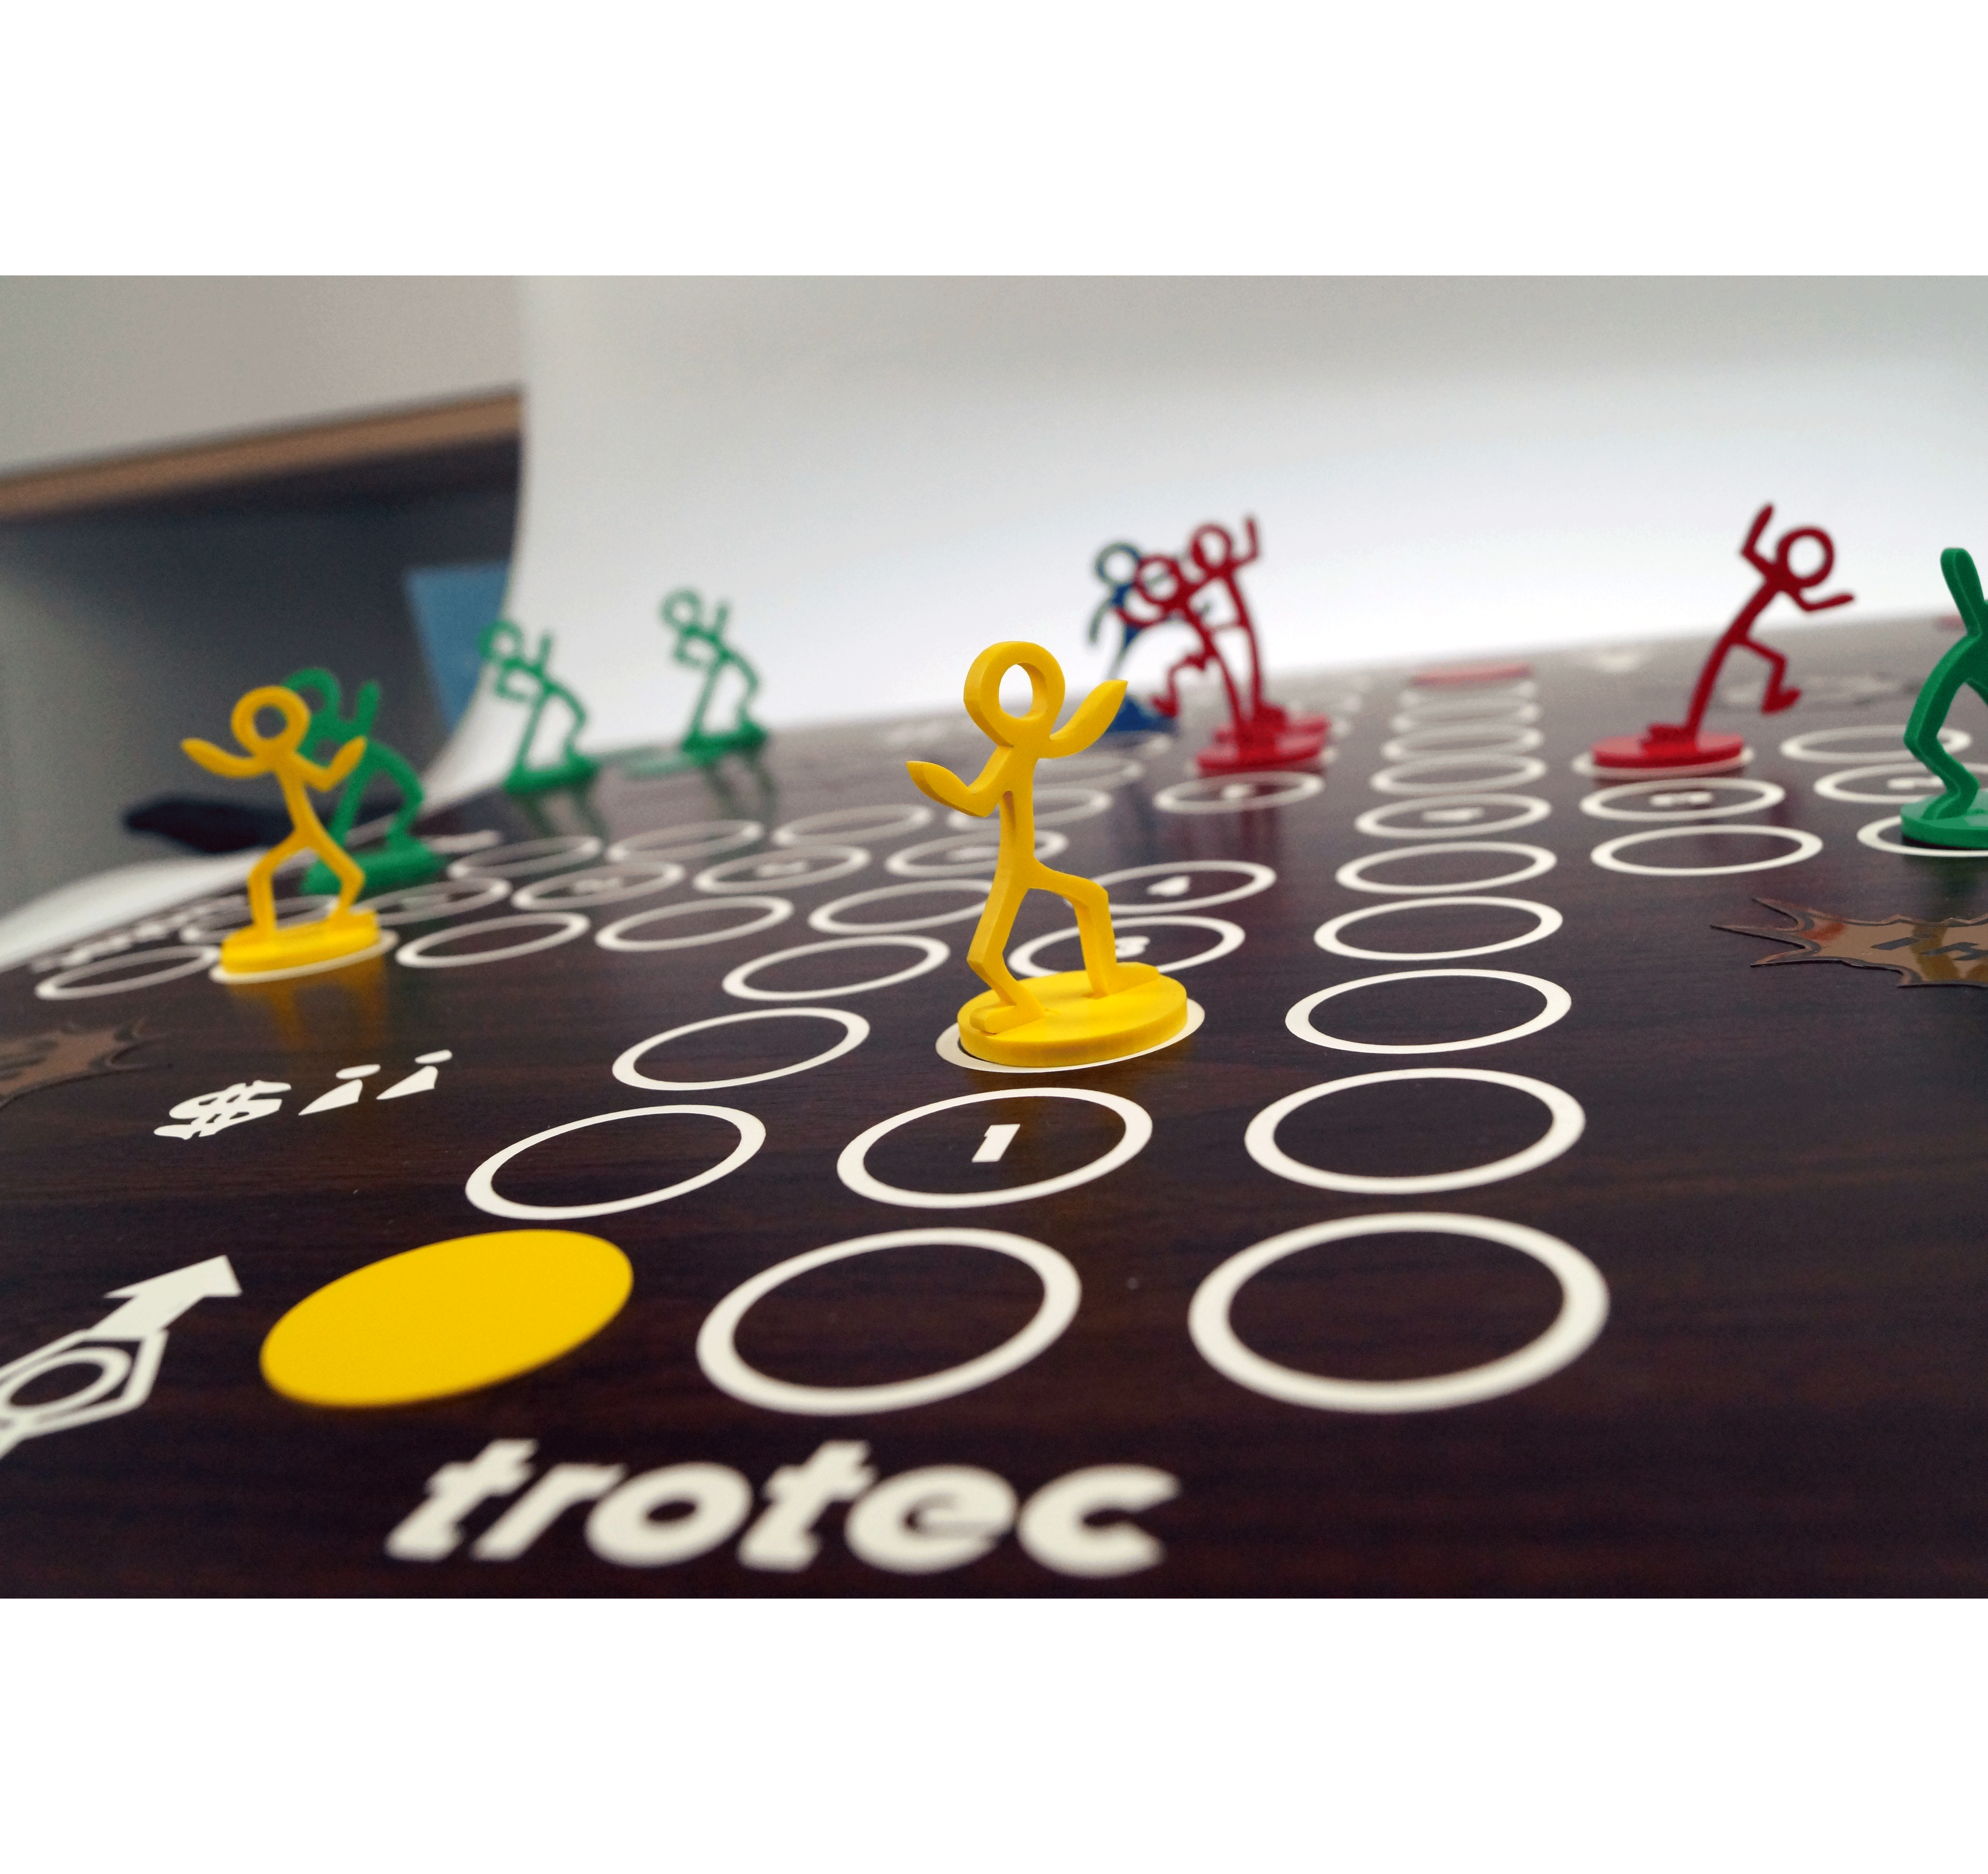 Laser engrave and cut your individual board game | DIY Trotec Laser